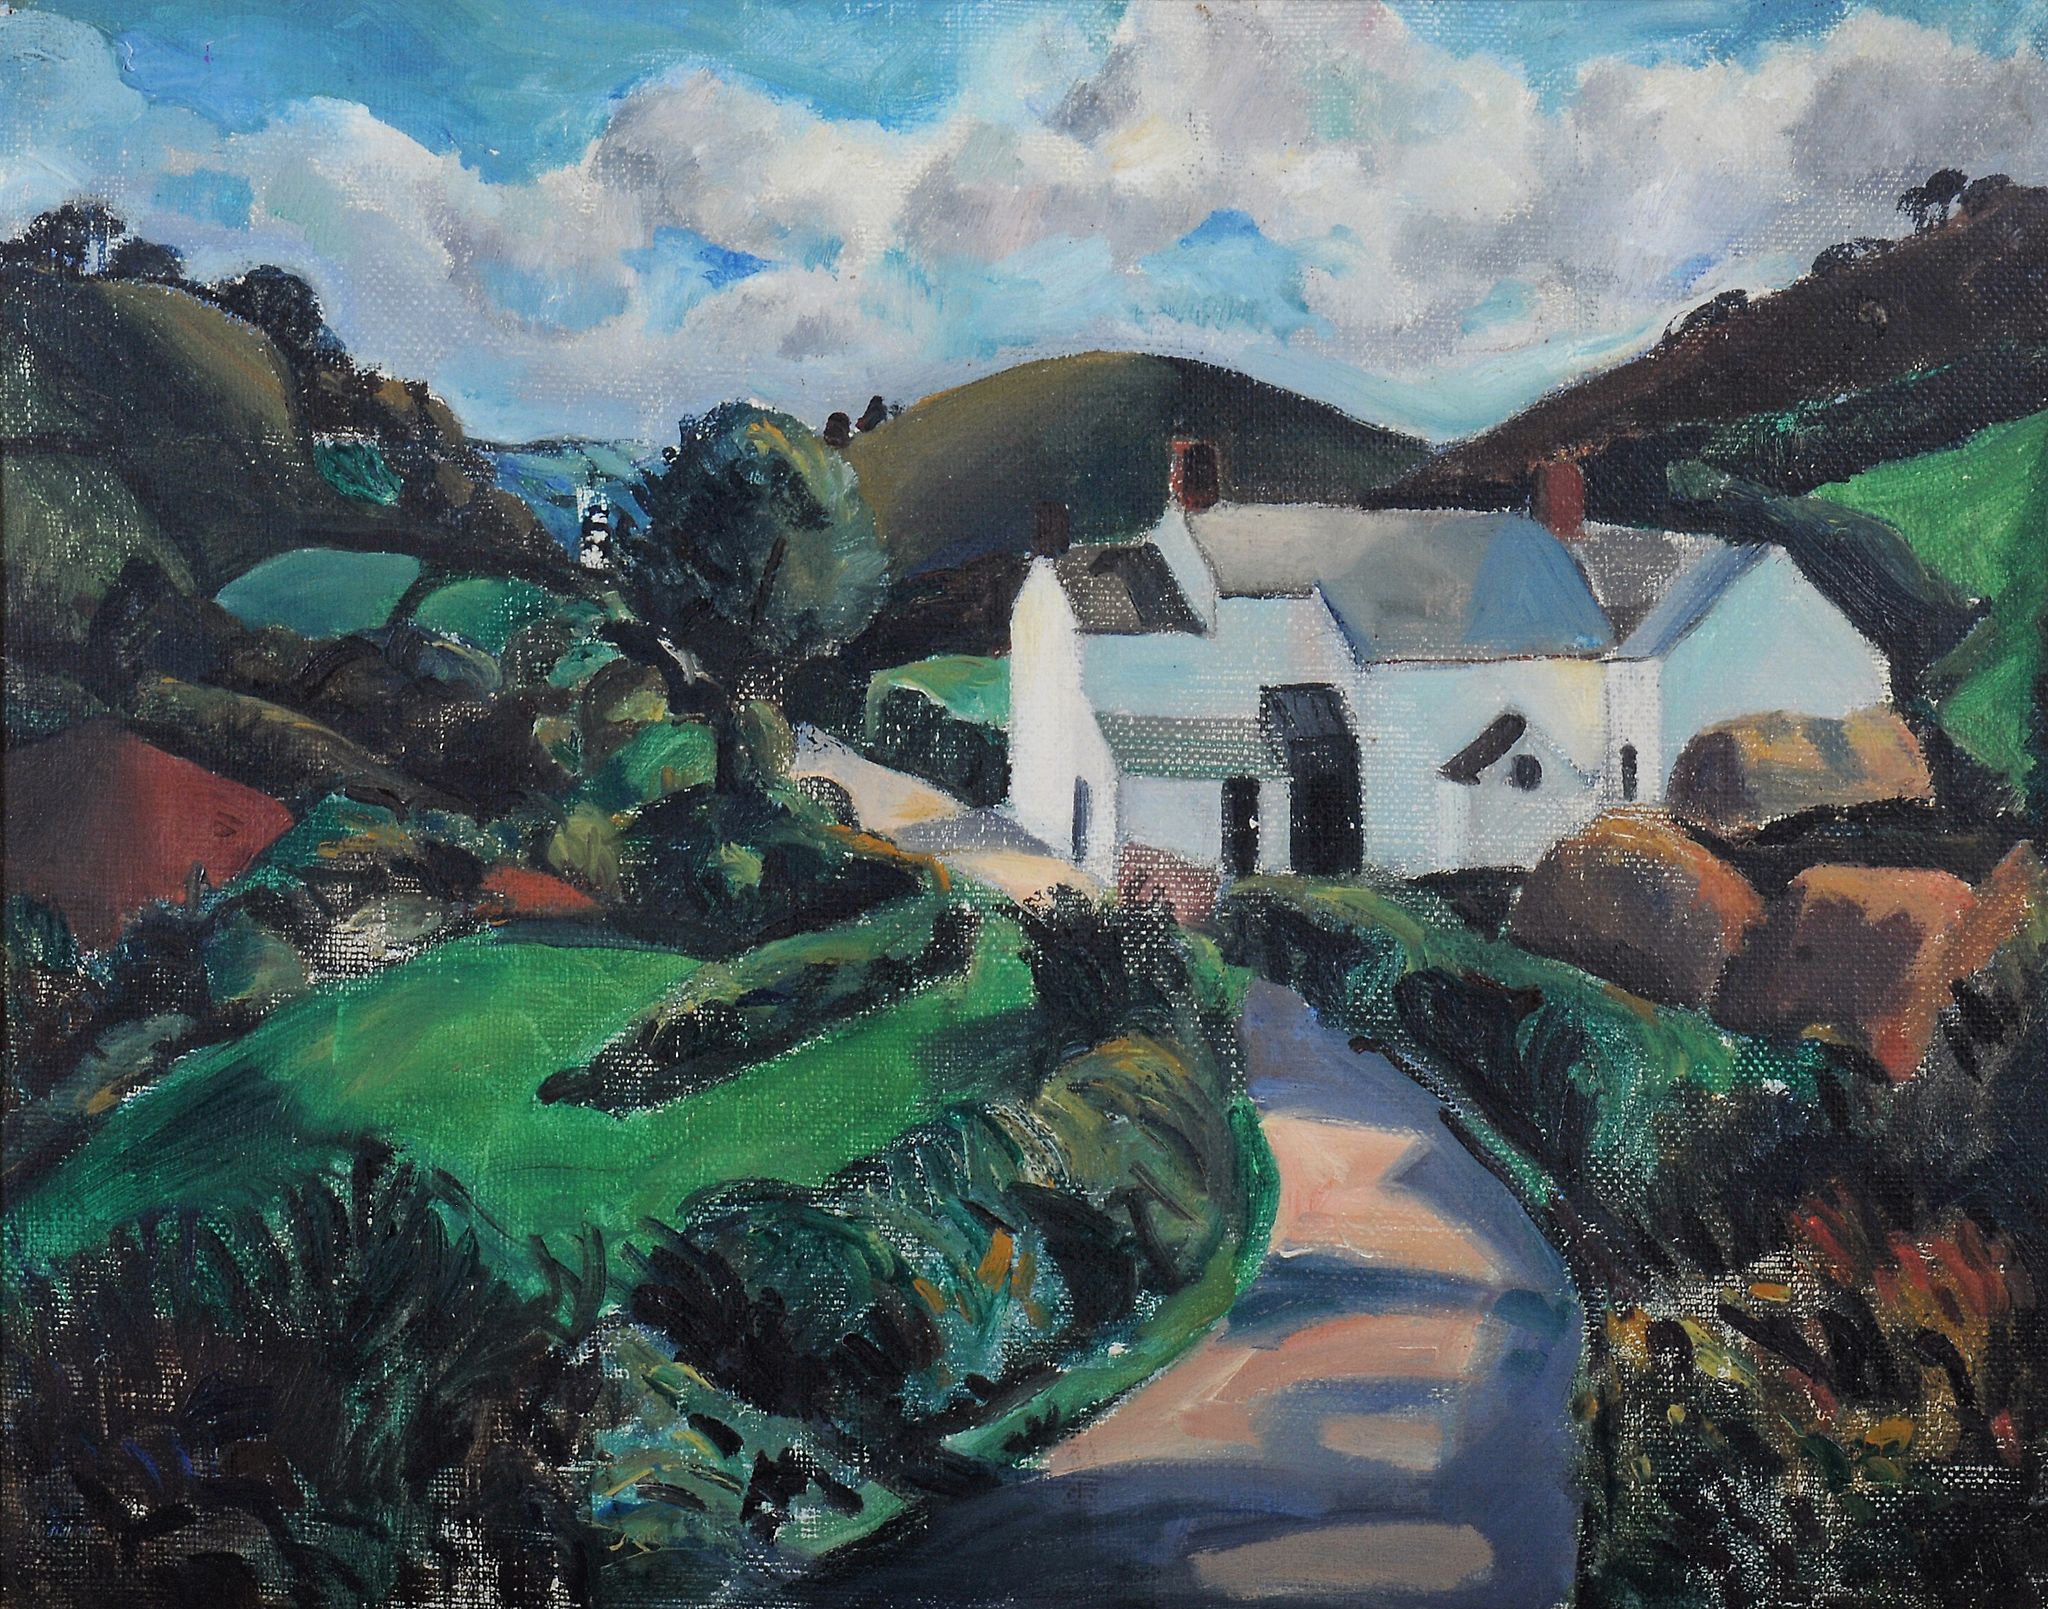 Christopher Wood (1901 - 1930) - The White Farm Oil on canvas 41 x 51.5 cm. (16 1/8 x 20 1/4 in.)